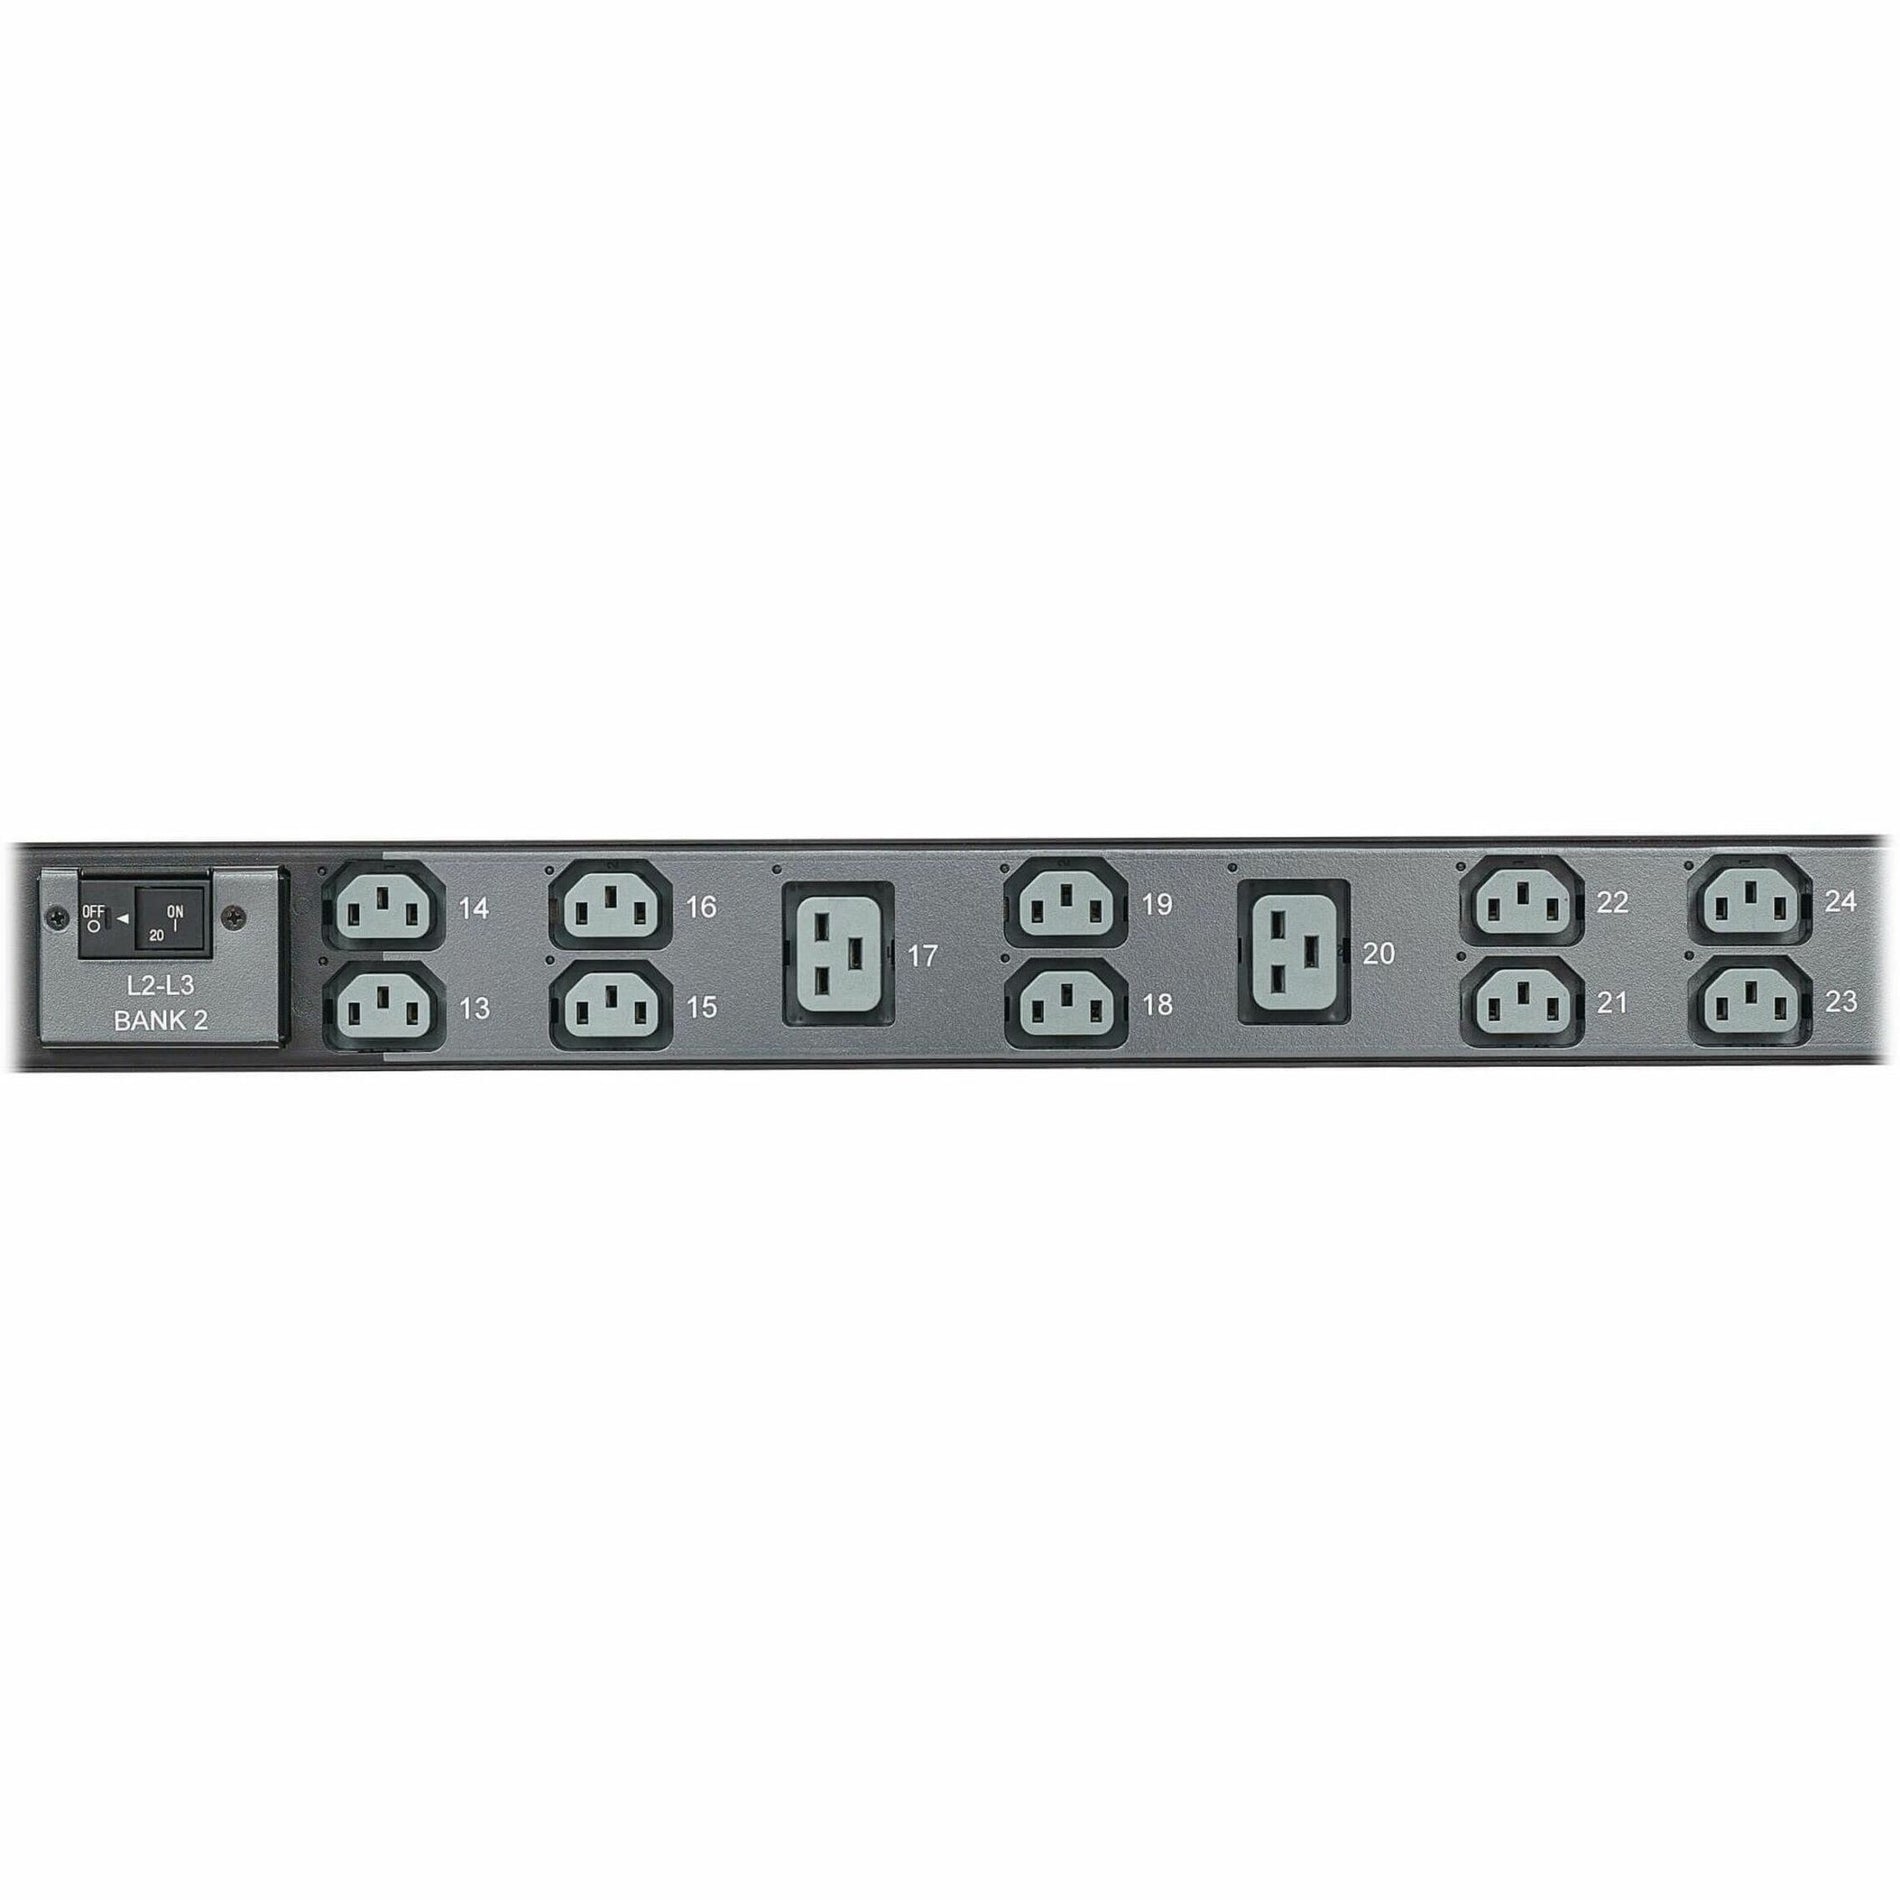 Tripp Lite PDU3EVSR1L2130 36-Outlets PDU, Managed, Switched, 8600W Power Rating, Three Phase, Remote Outlet Switching